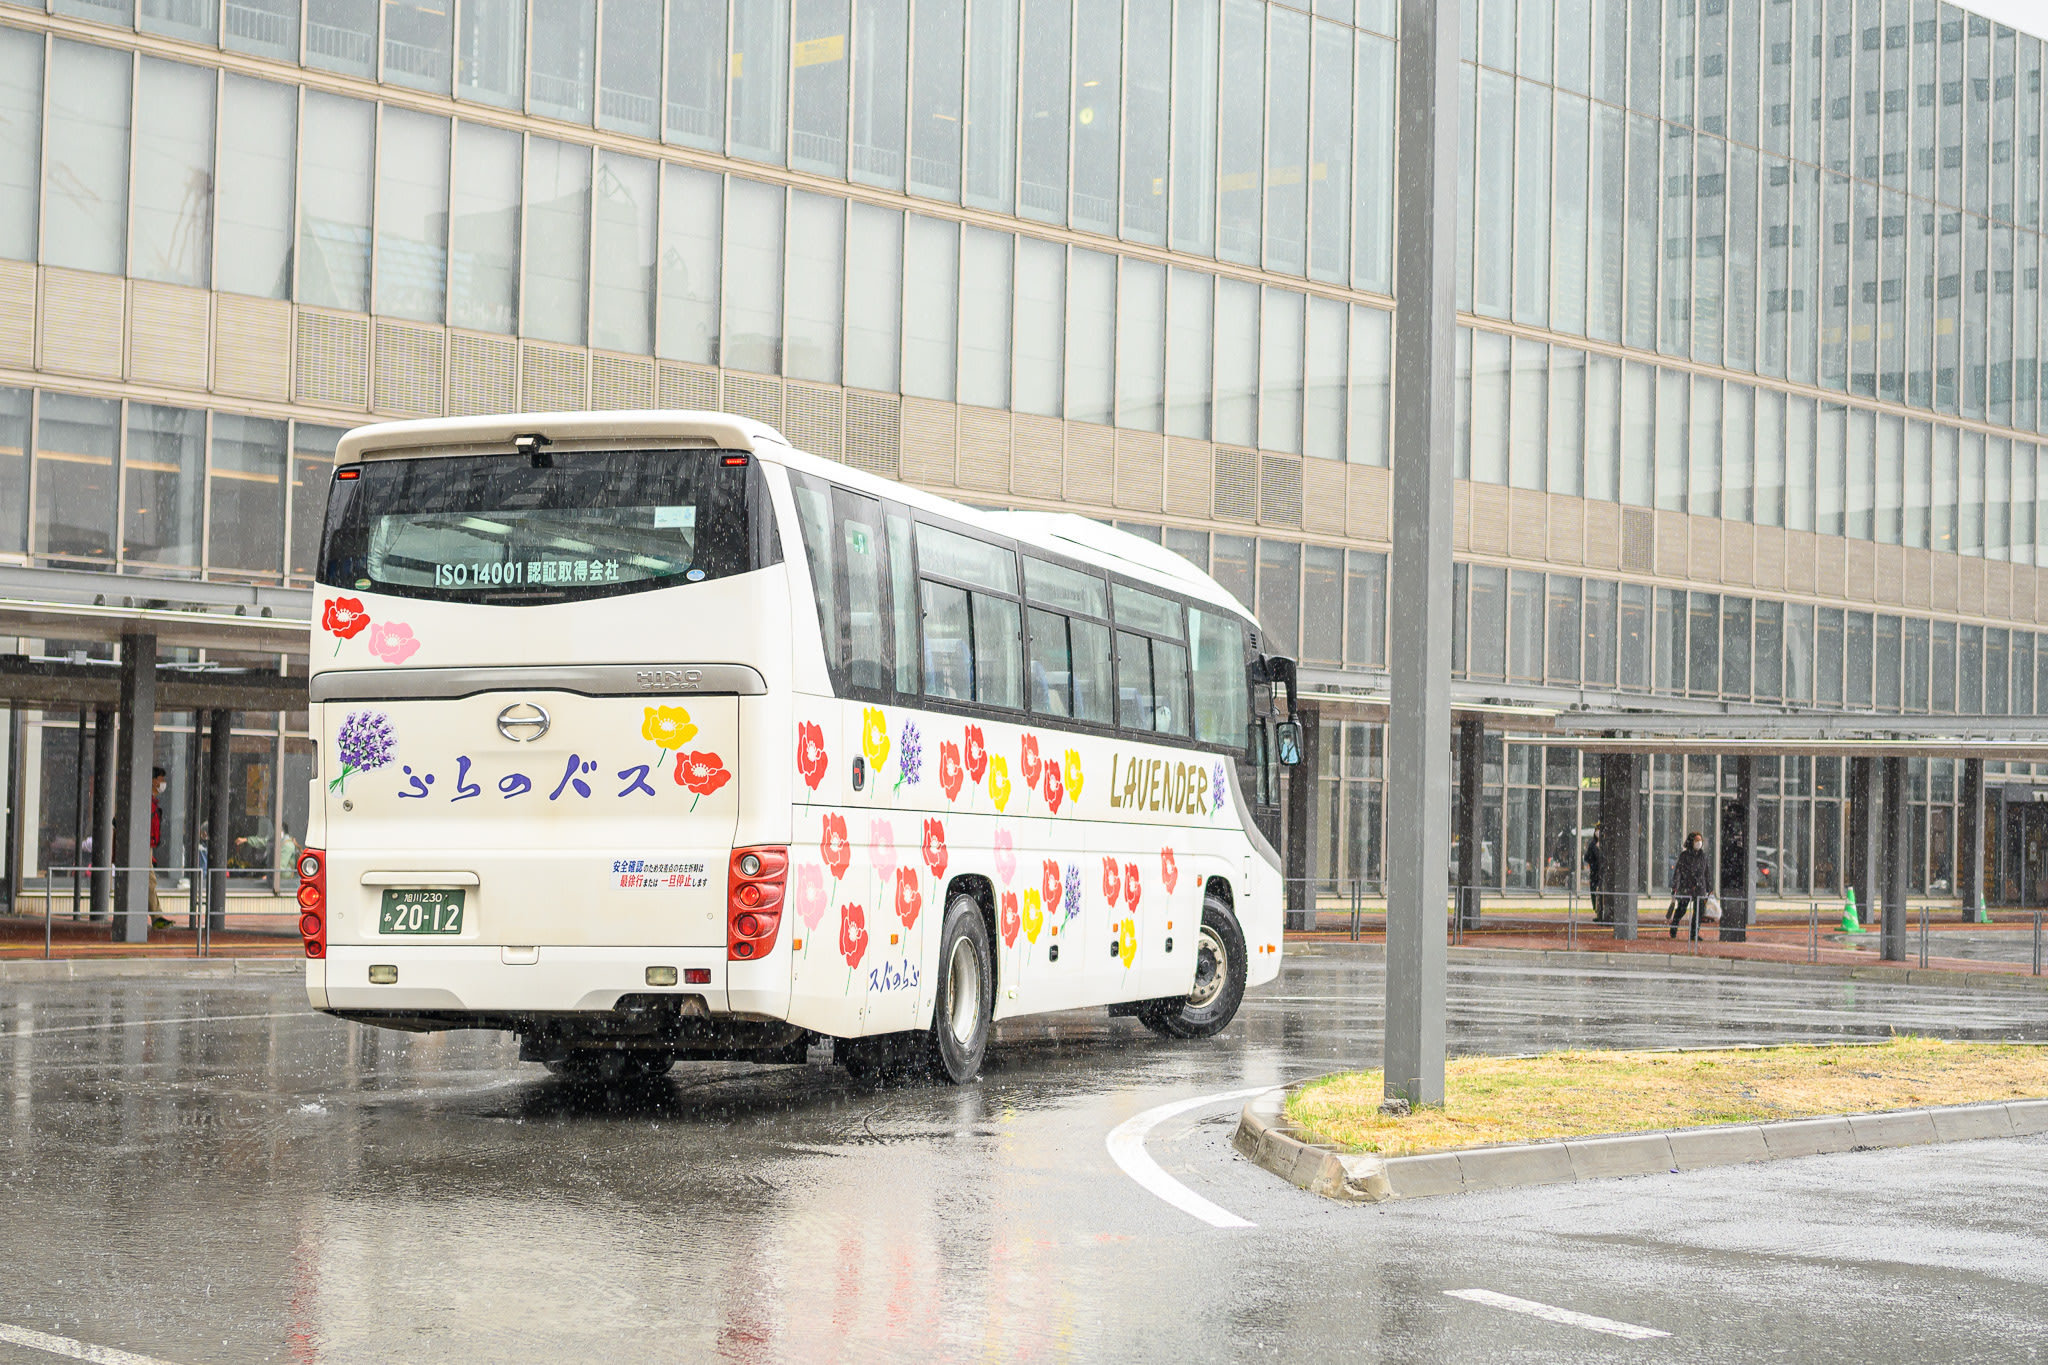 The Lavender Bus, covered in colourful flowers, pulls out of Asahikawa Station. This is the airport bus that runs between Furano and Asahikawa.